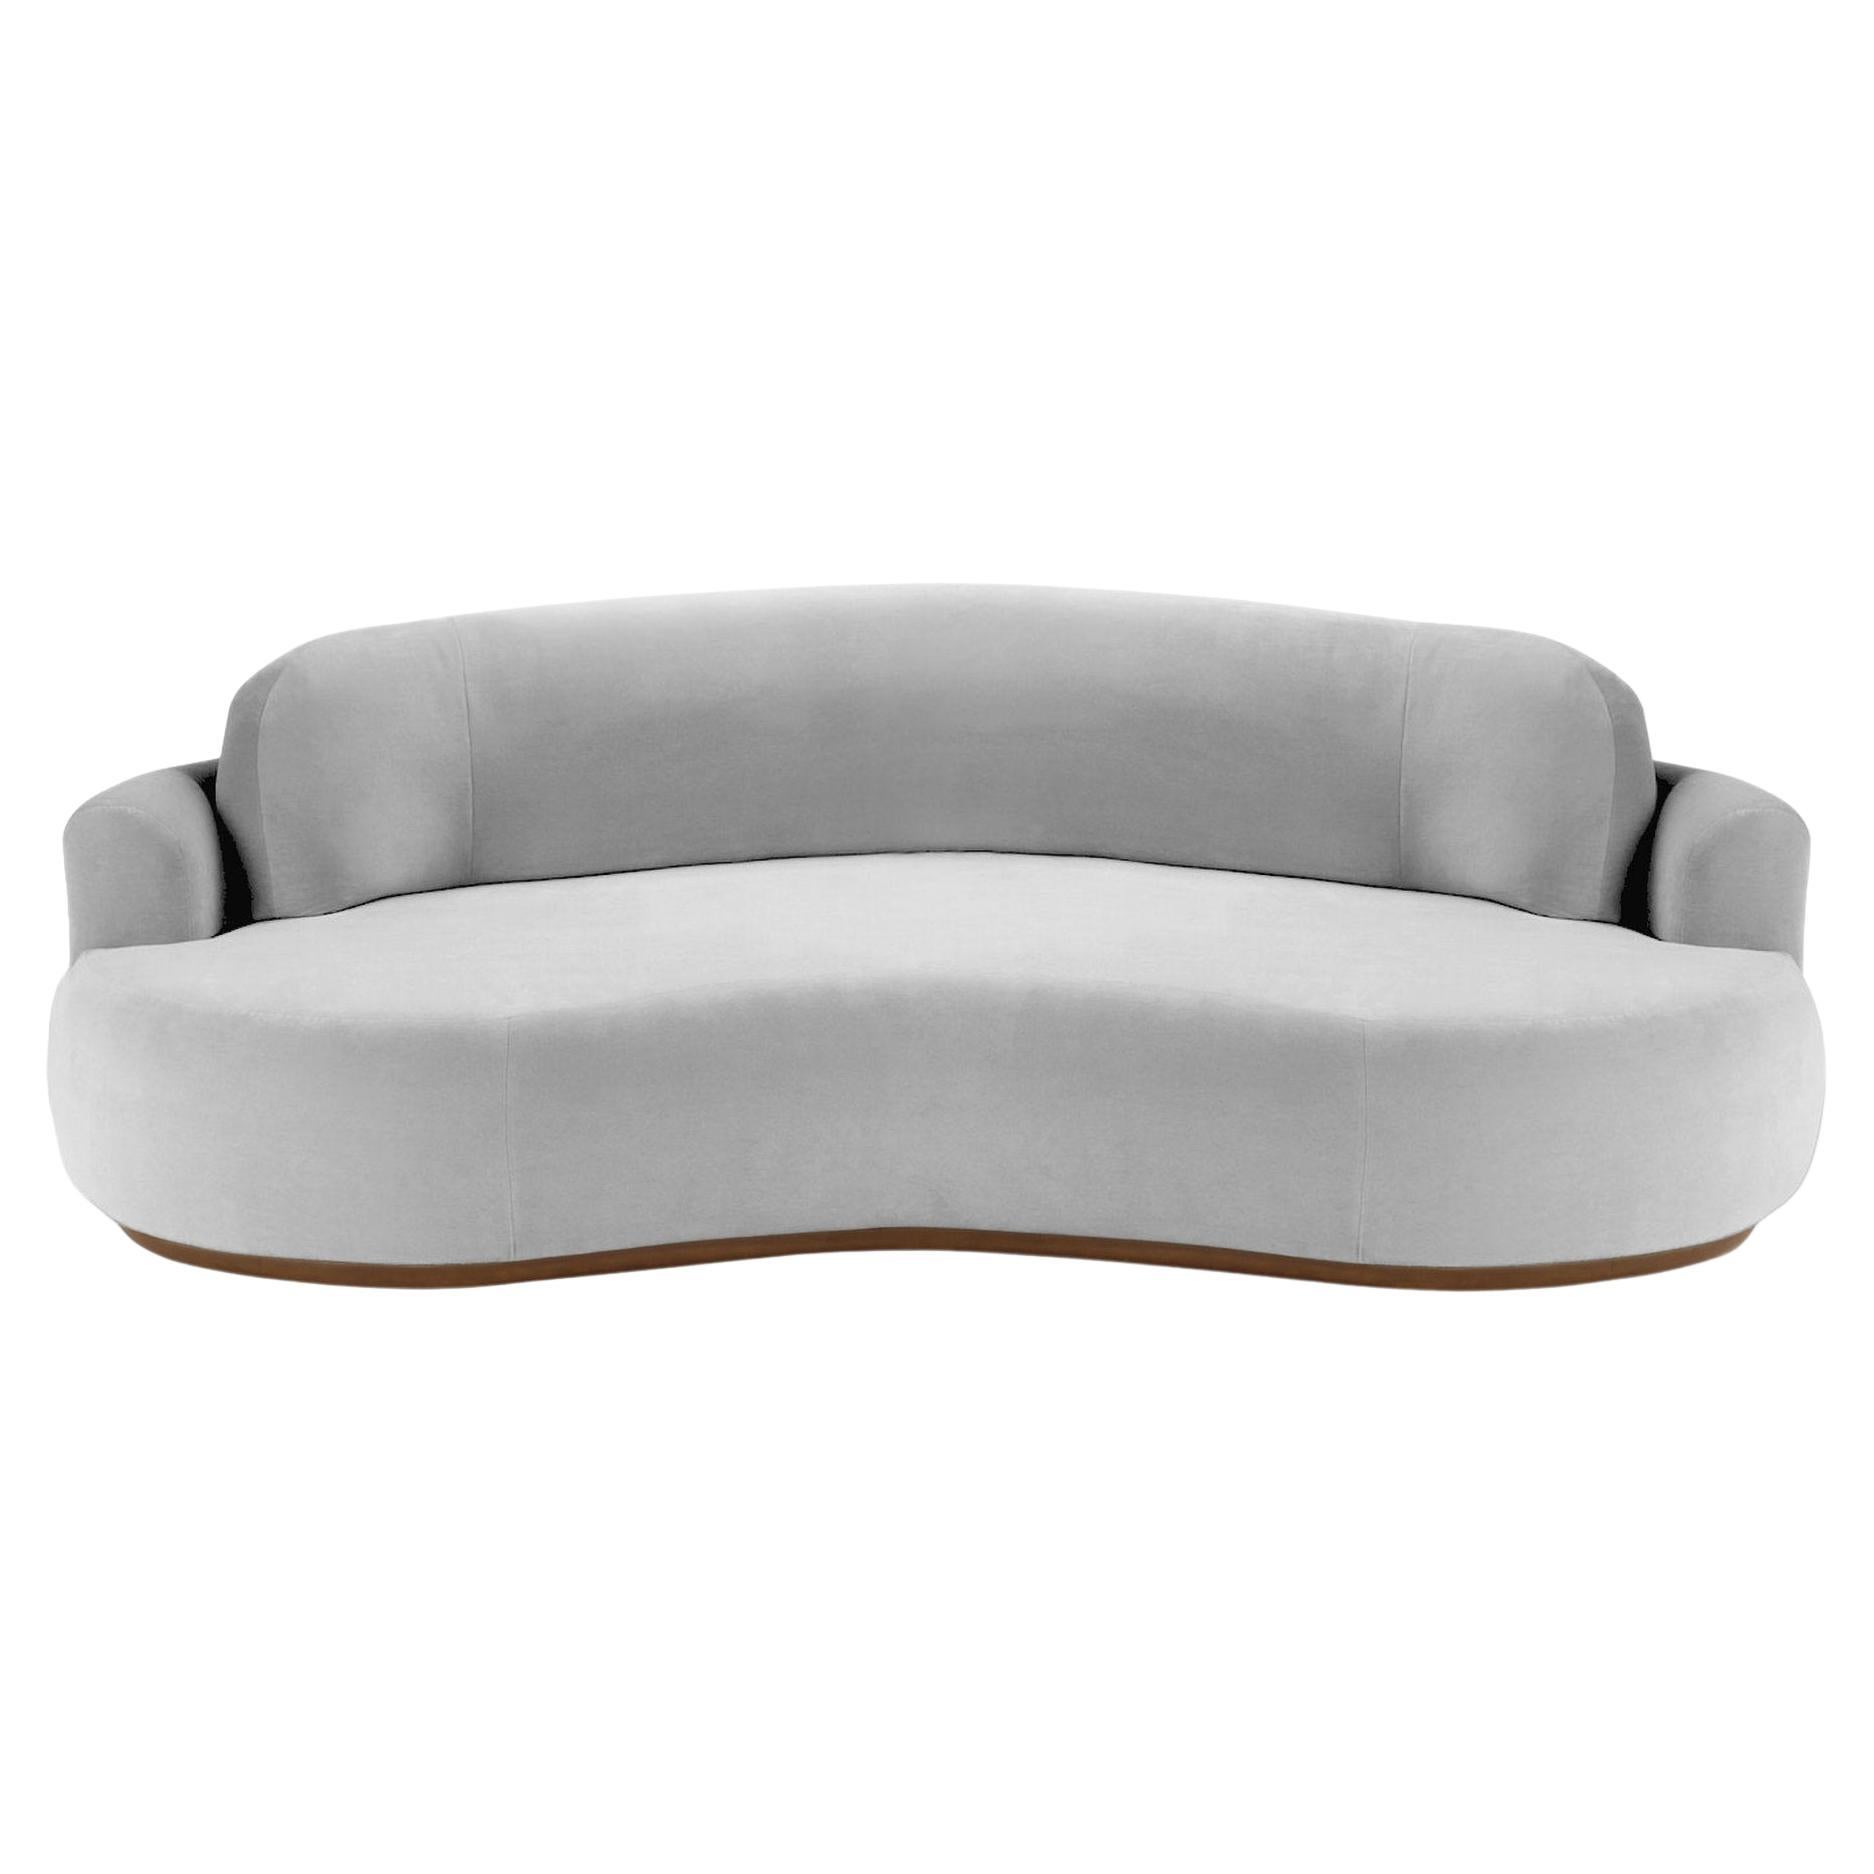 Naked Curved Sofa, Large with Beech Ash-056-1 and Aluminium